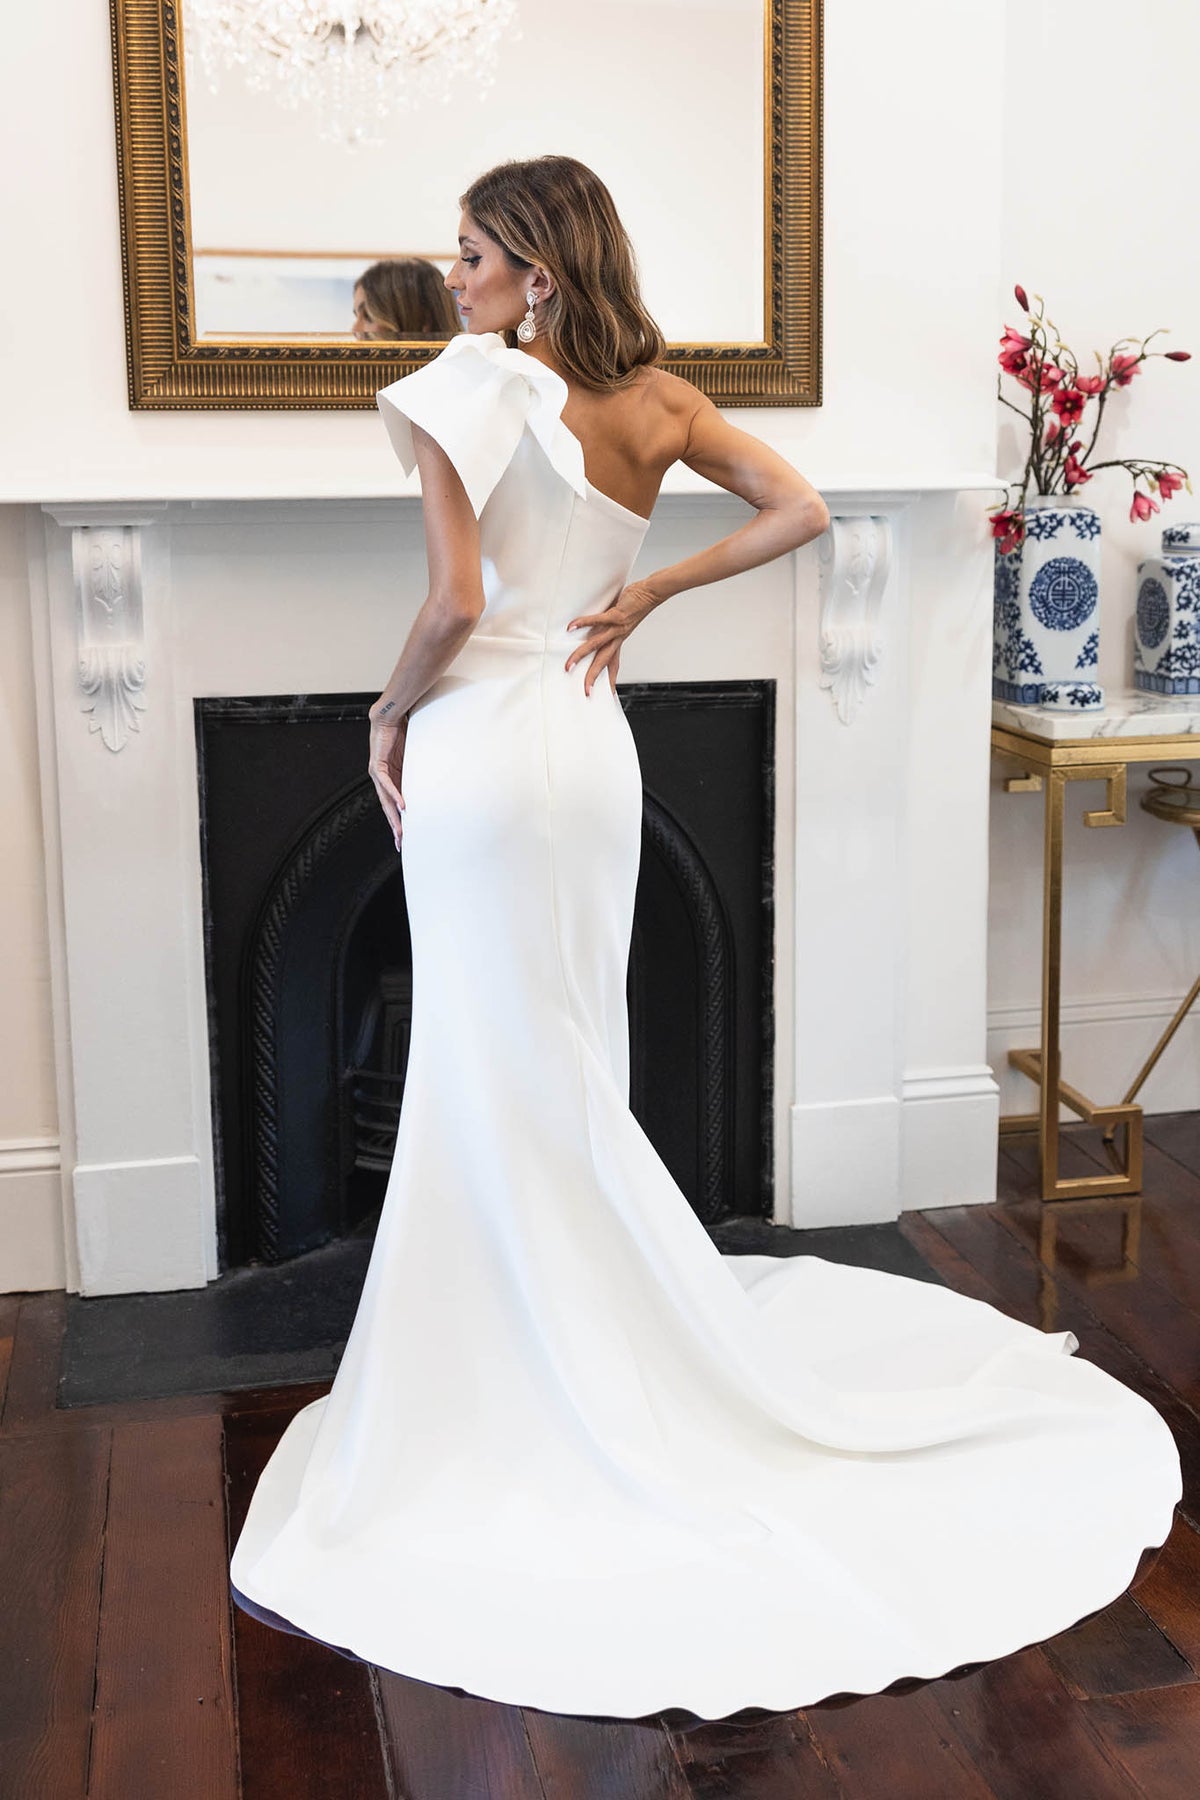 Sweep Train Design of Ivory White One Shoulder Fit & Flare Wedding Gown with Ruffle Detail